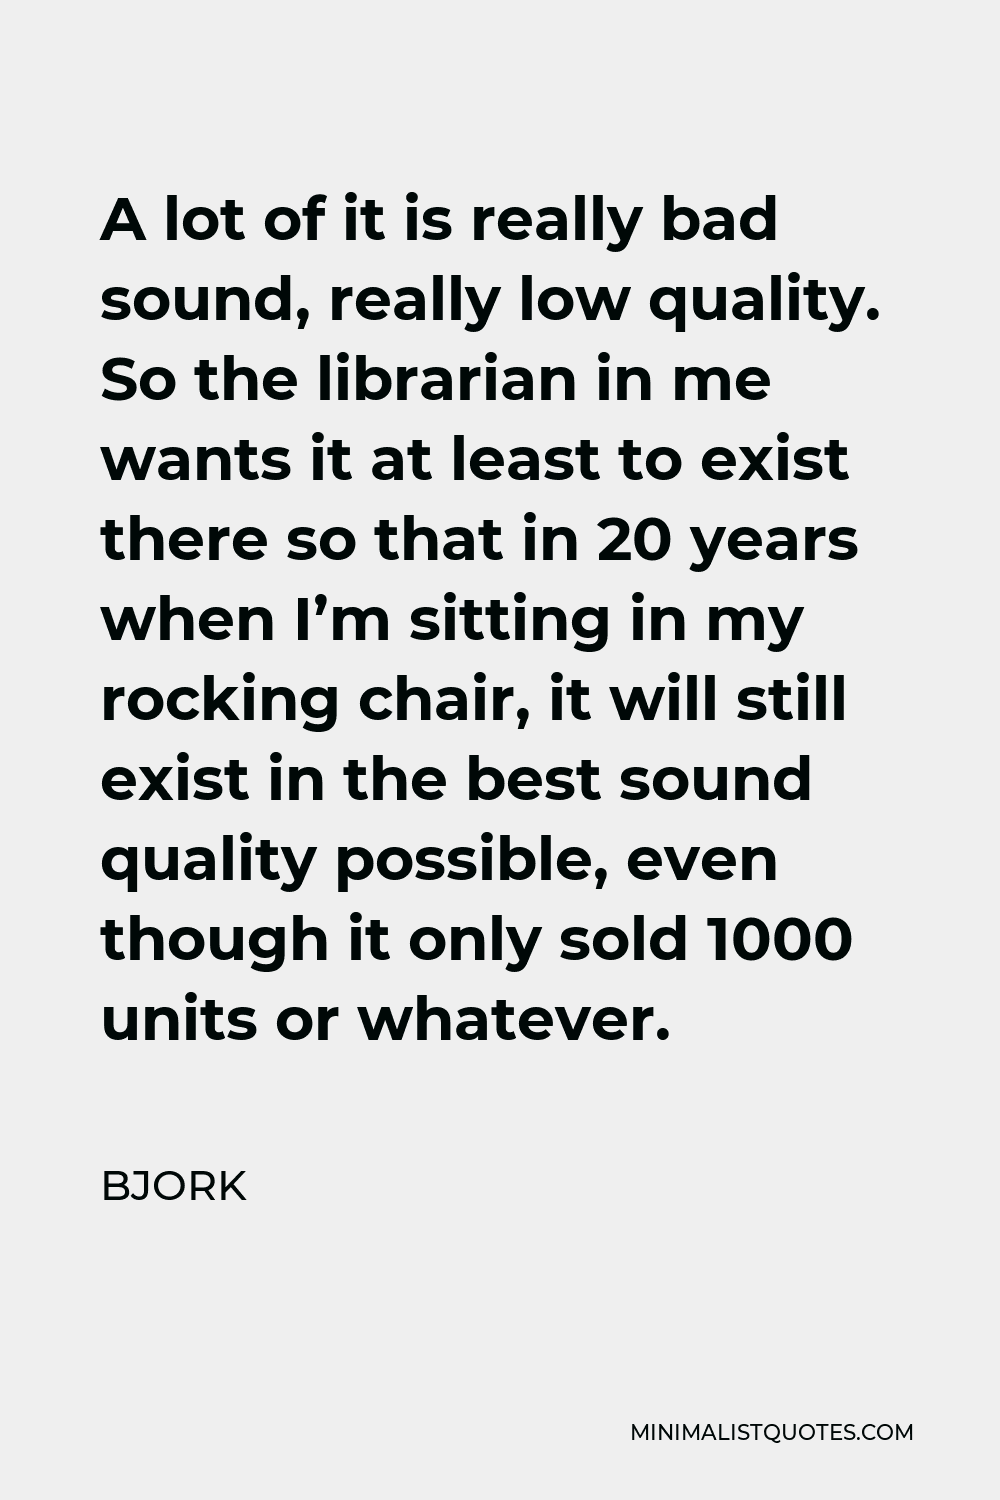 Bjork Quote - A lot of it is really bad sound, really low quality. So the librarian in me wants it at least to exist there so that in 20 years when I’m sitting in my rocking chair, it will still exist in the best sound quality possible, even though it only sold 1000 units or whatever.